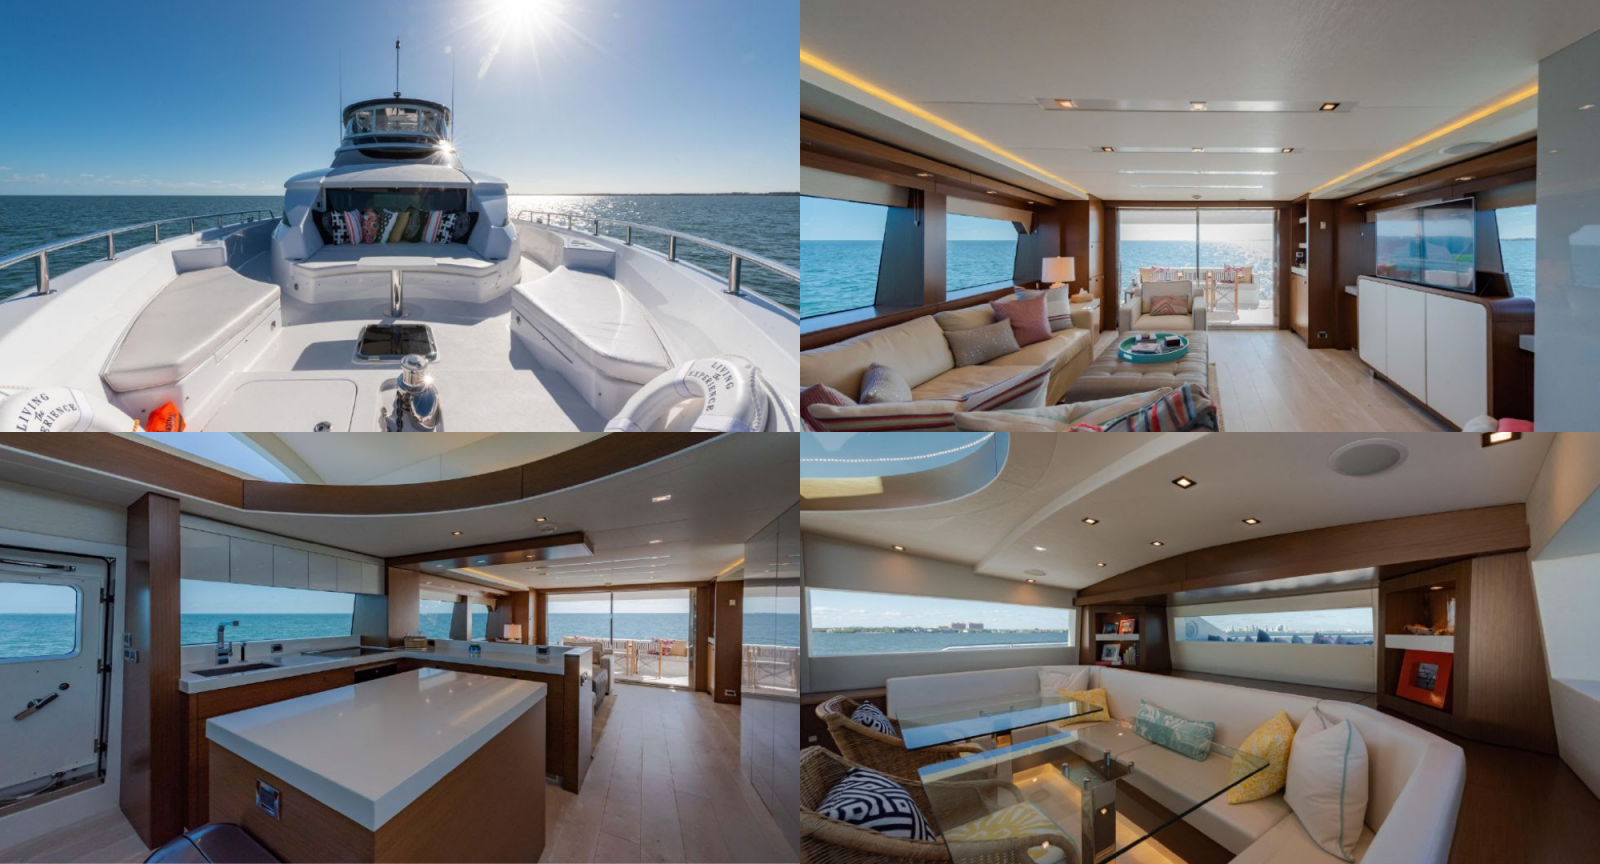 75 Foot Hatteras Sold By Corey Simon